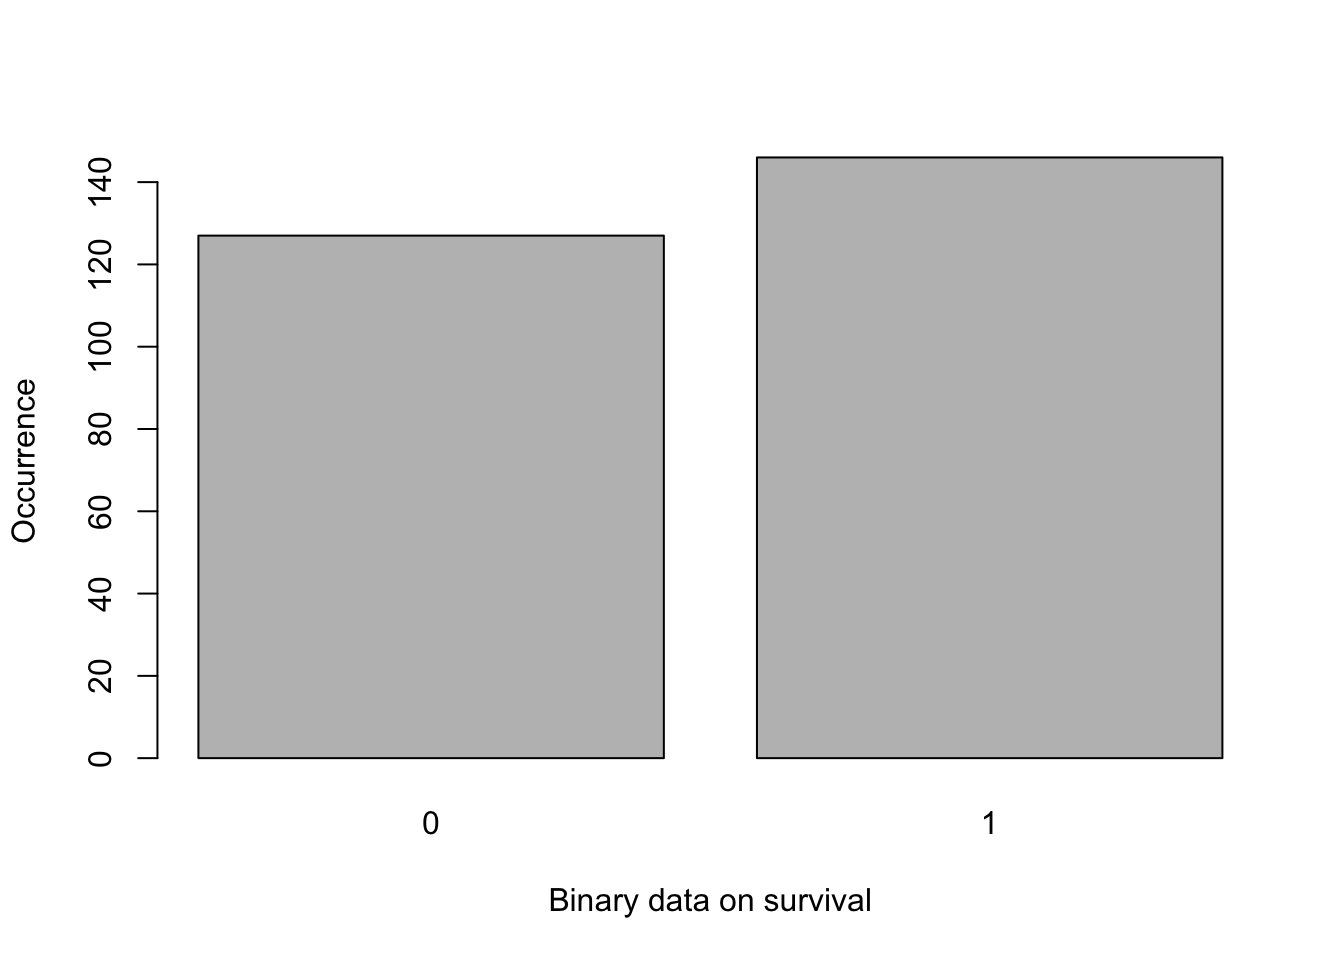 Barplot of survival of plantlets after 5 weeks of growth.